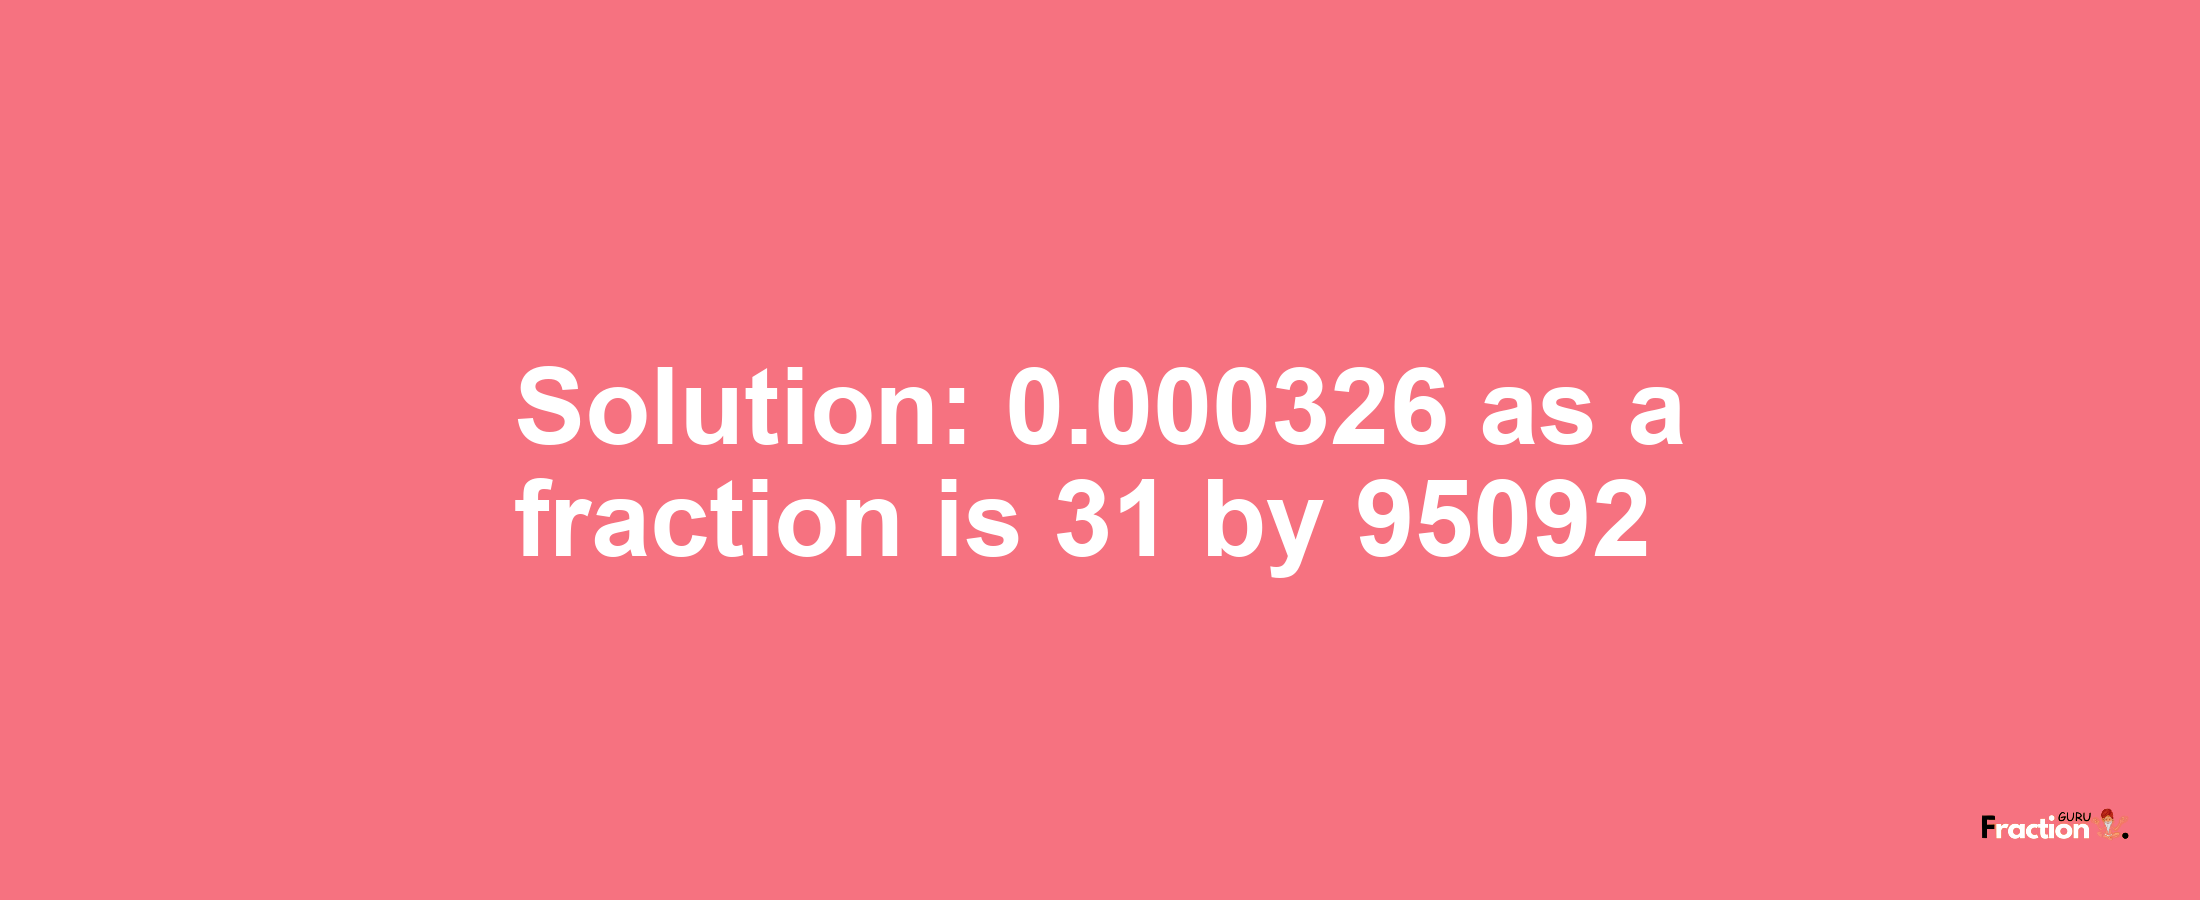 Solution:0.000326 as a fraction is 31/95092